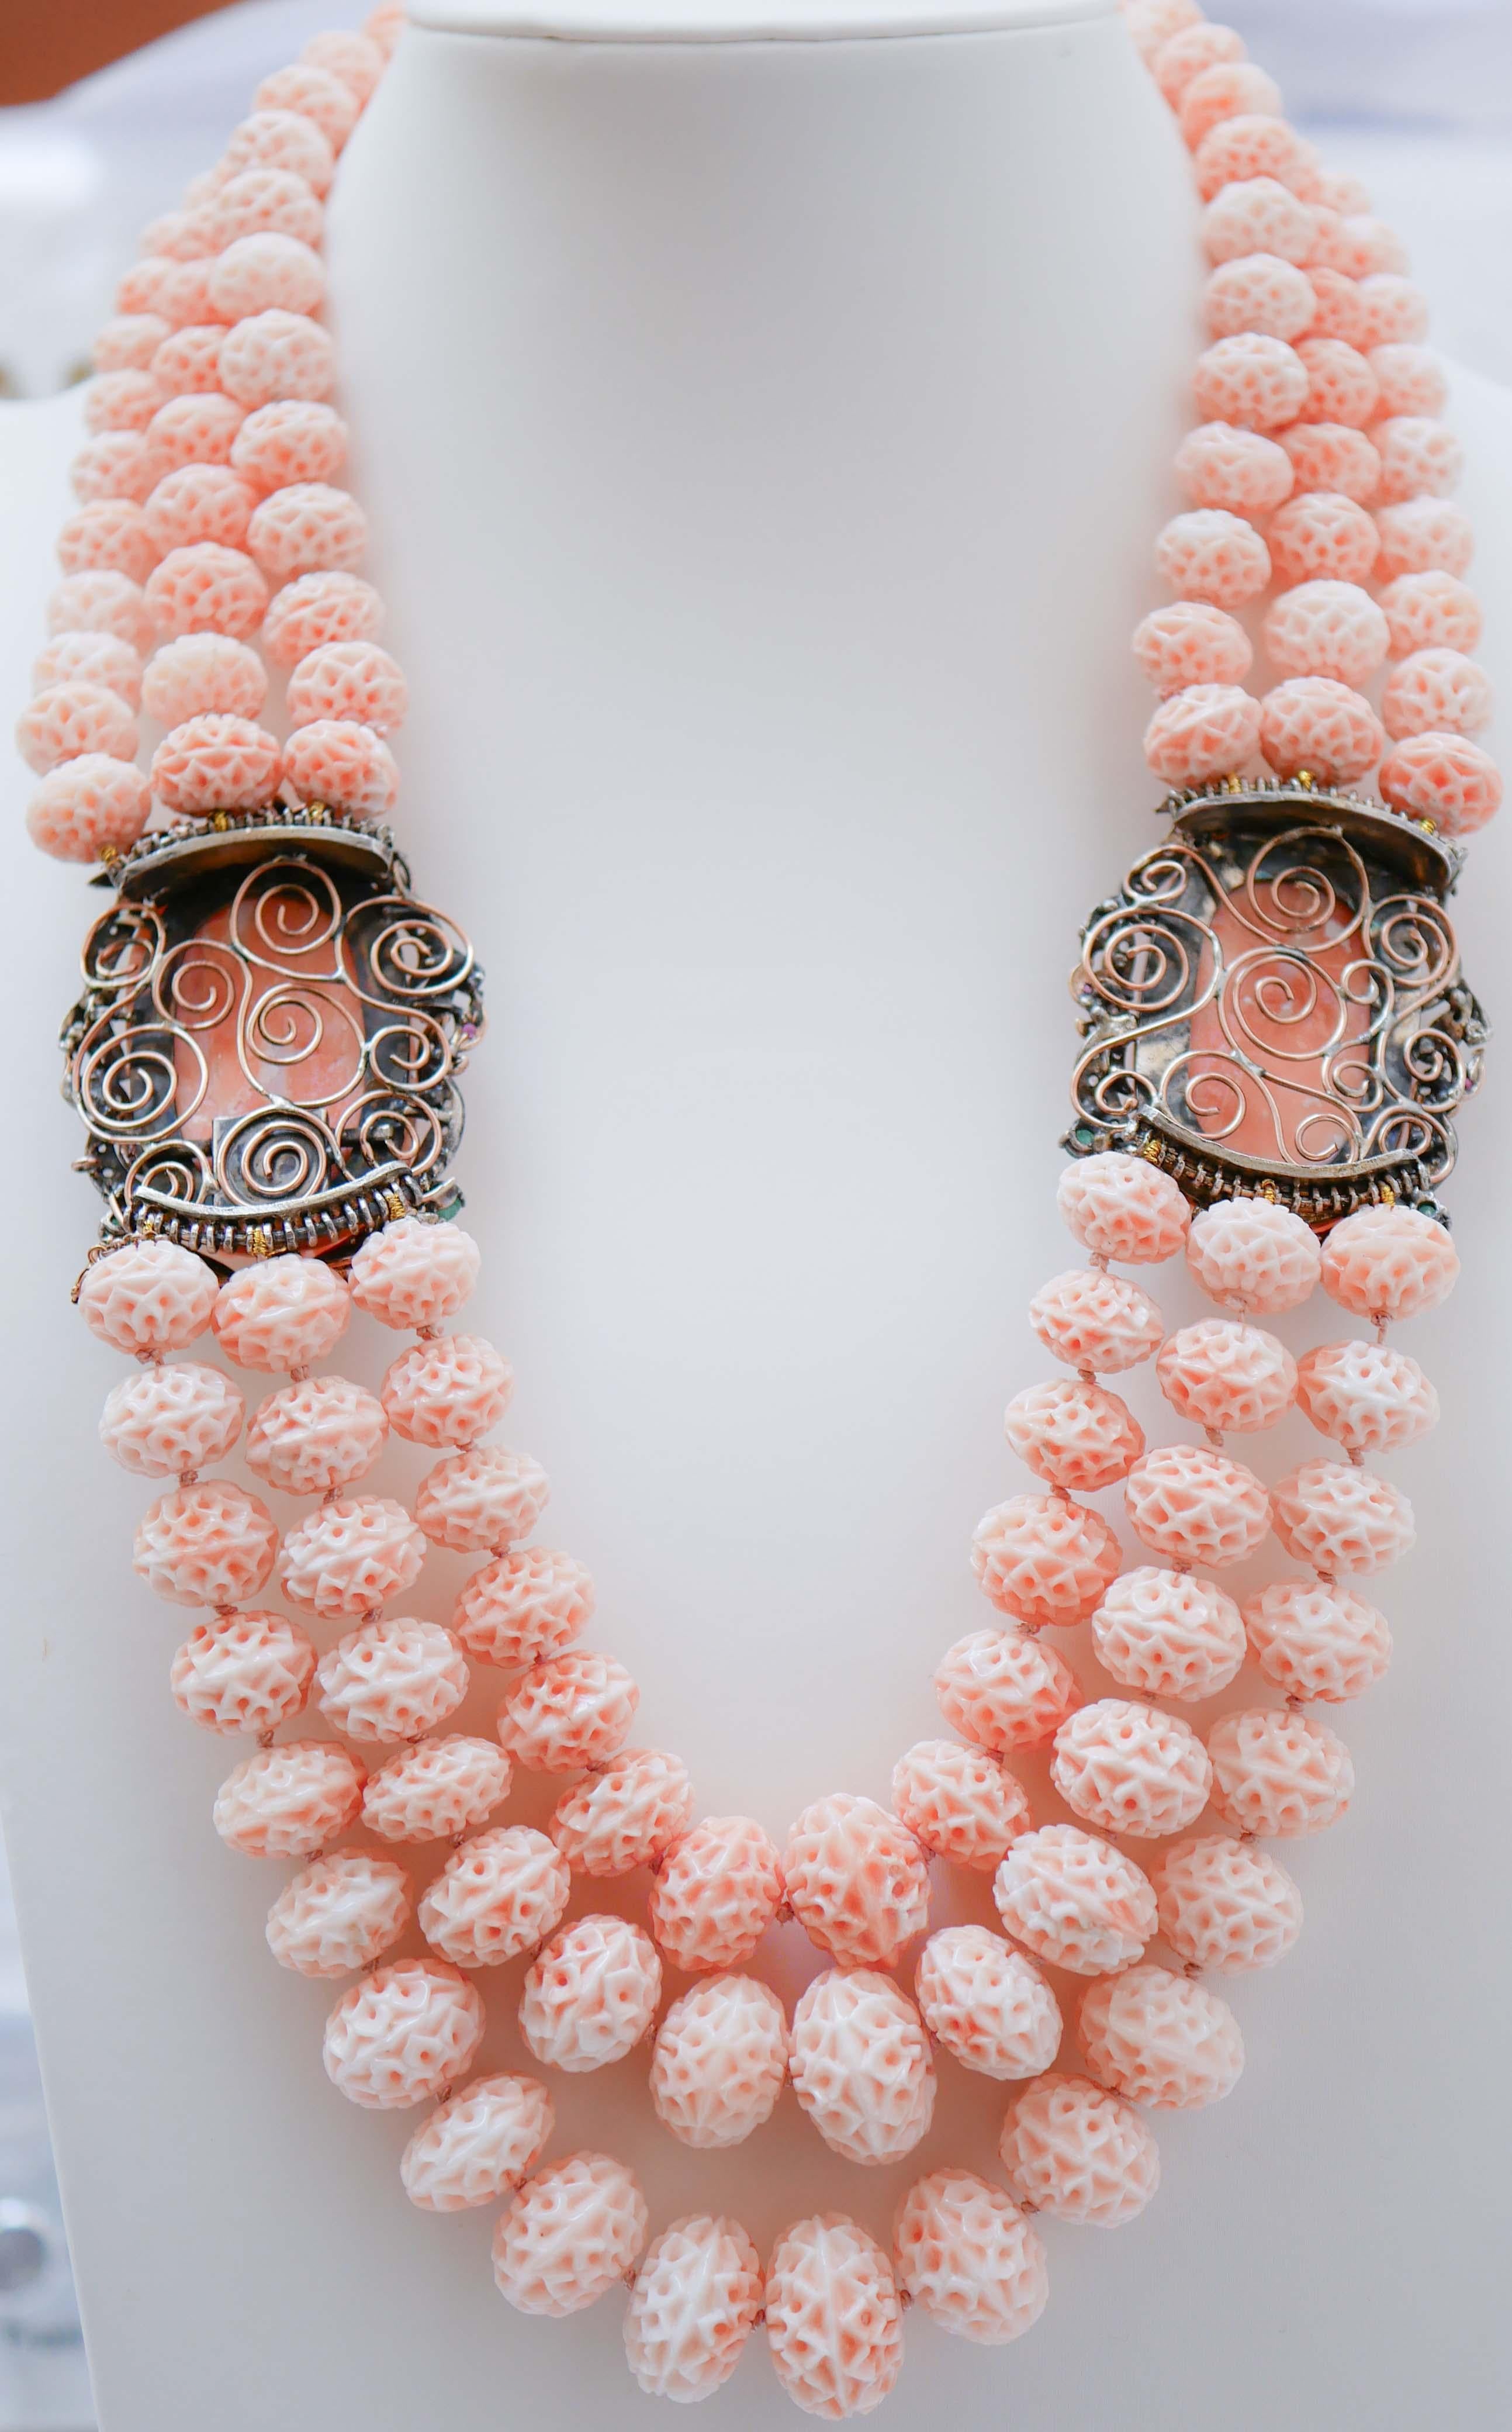 Mixed Cut Coral, Emeralds, Rubies, Diamonds, Rose Gold and Silver Necklace.